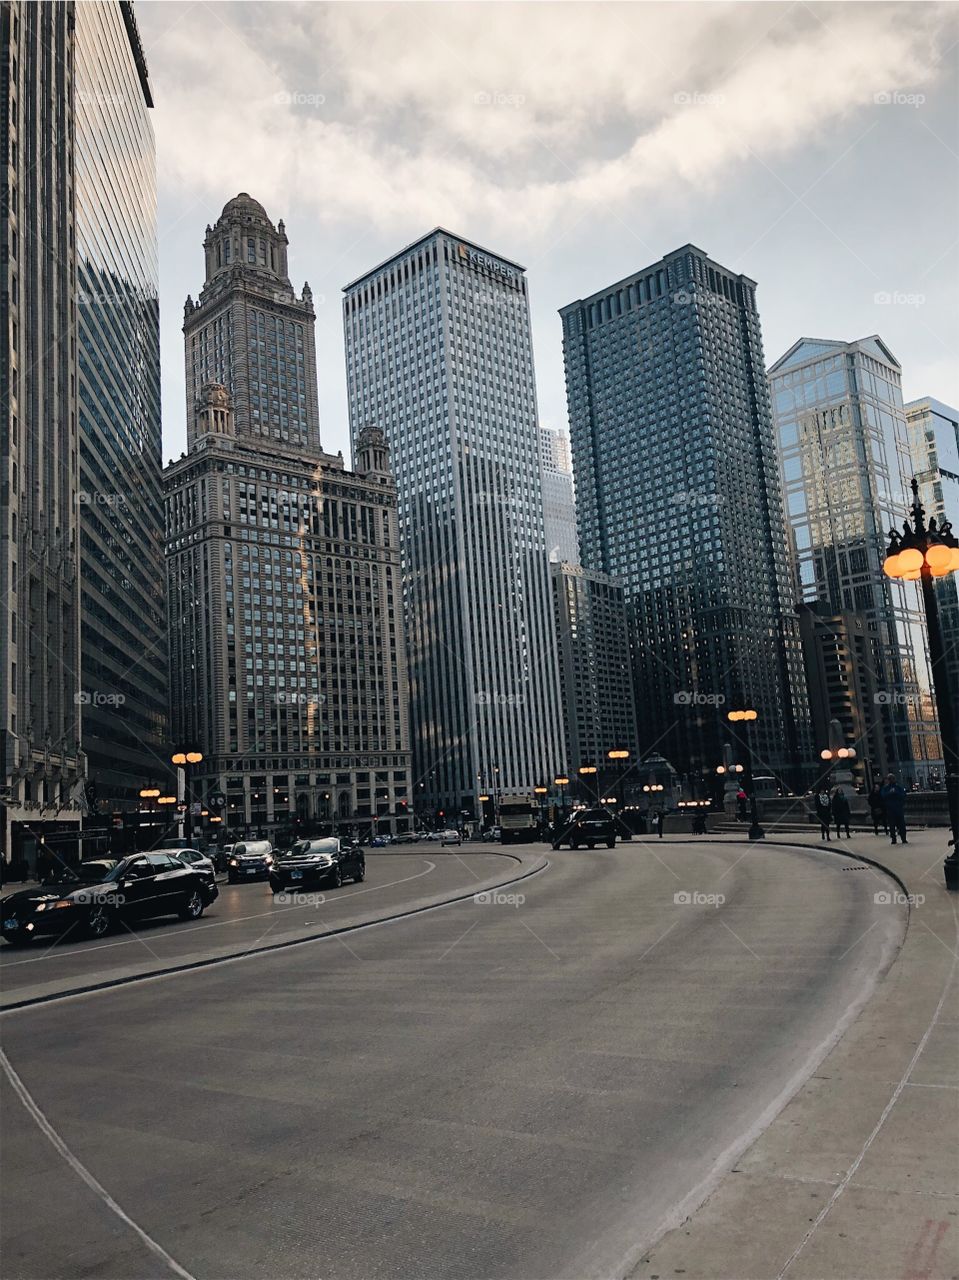 Chicago Hustle and Bustle